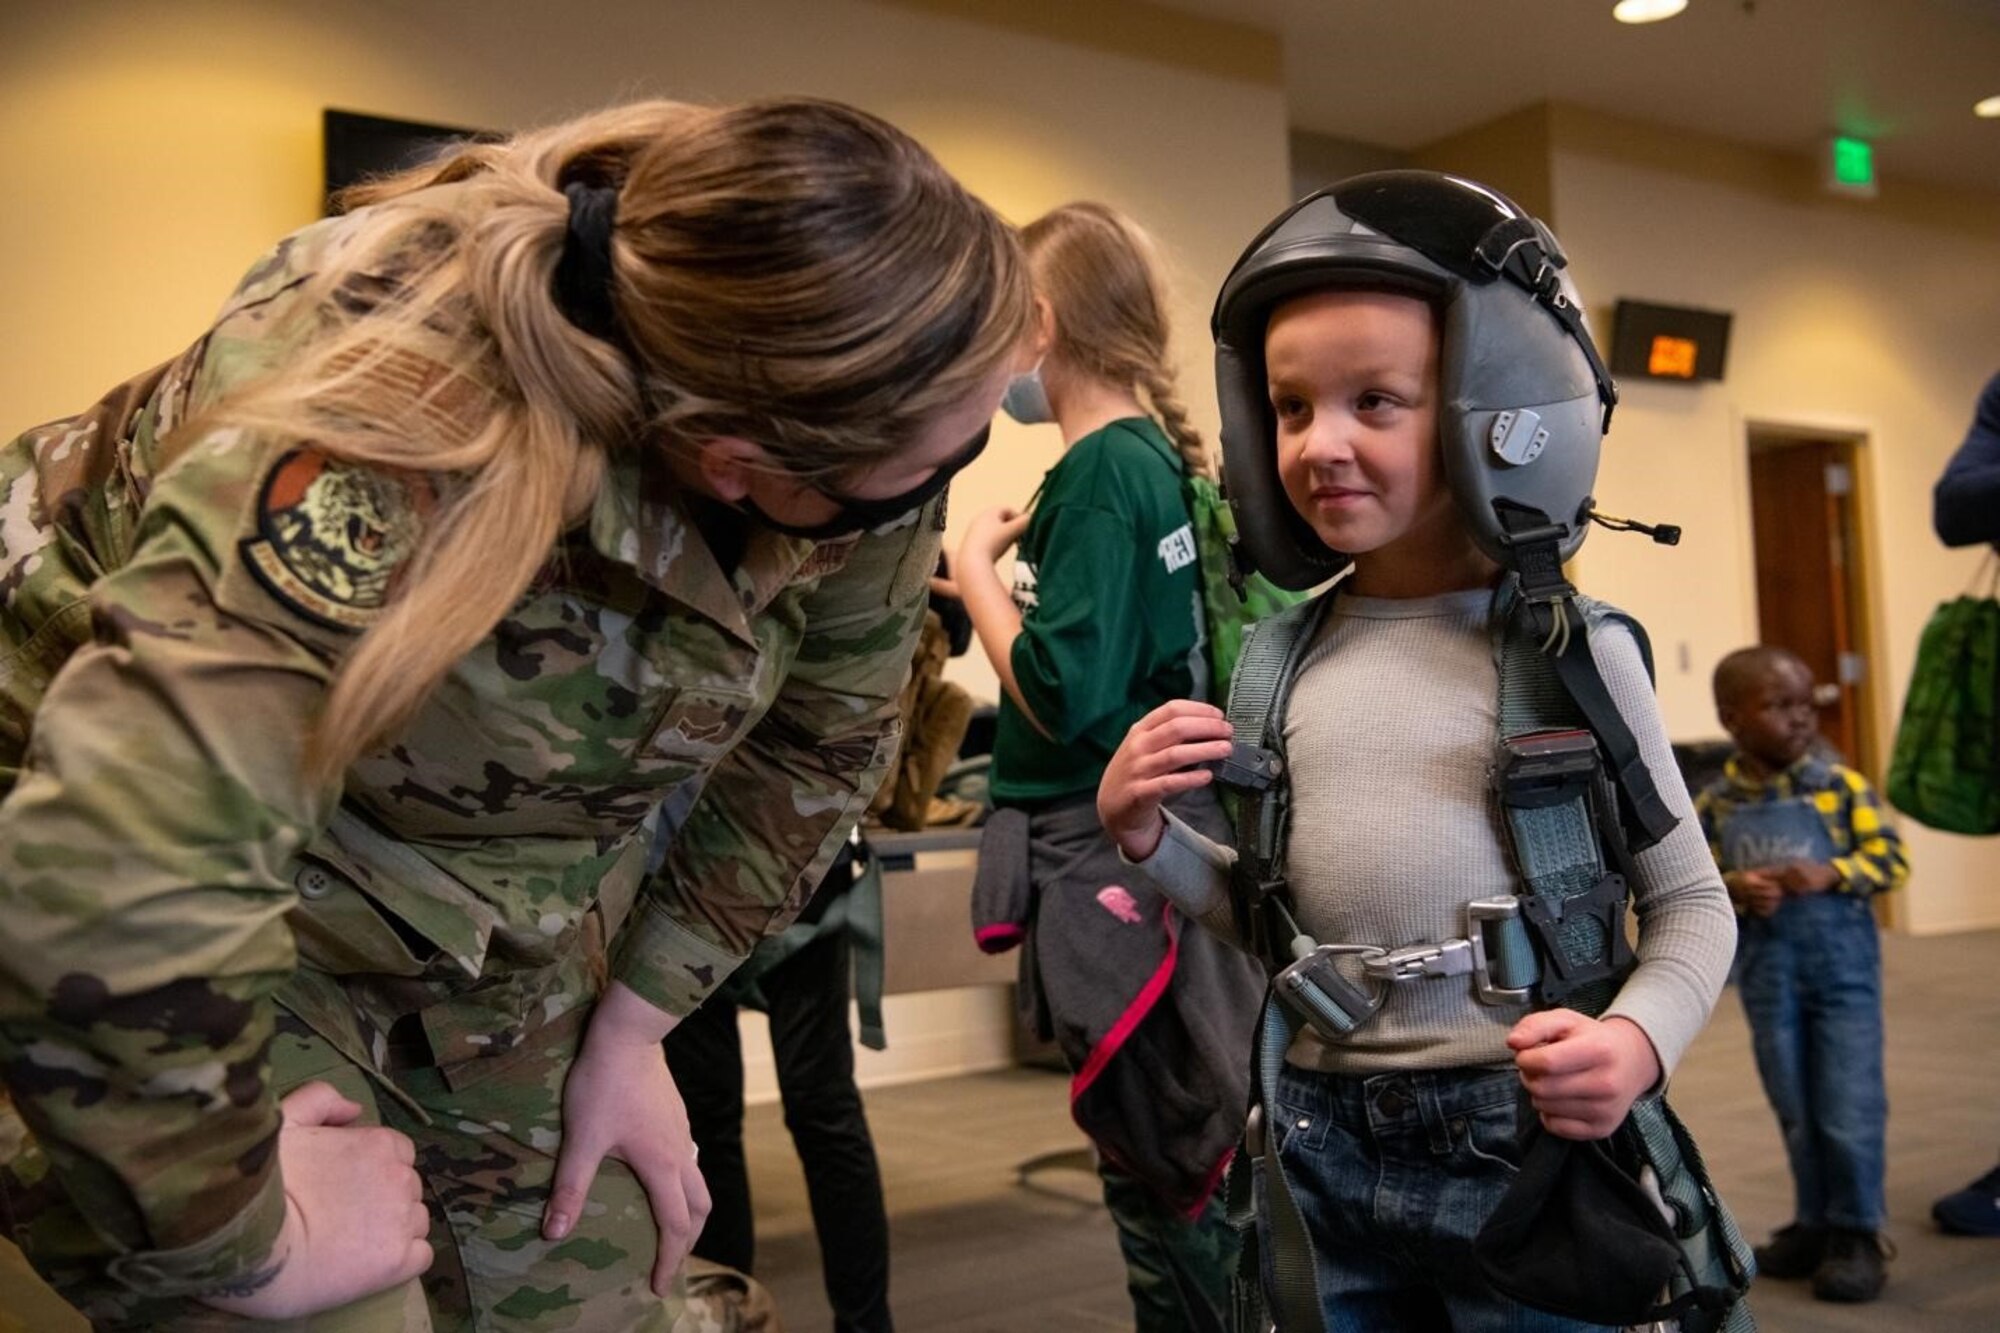 Airman 1st Class Jordyn Eubanks, a 28th Operations Support Squadron aircrew and flight equipment technician, shows Grayson, a military child, how to don aircrew flight equipment at the Kid’s Deployment Line event on Ellsworth Air Force Base, S.D., April 17, 2021.